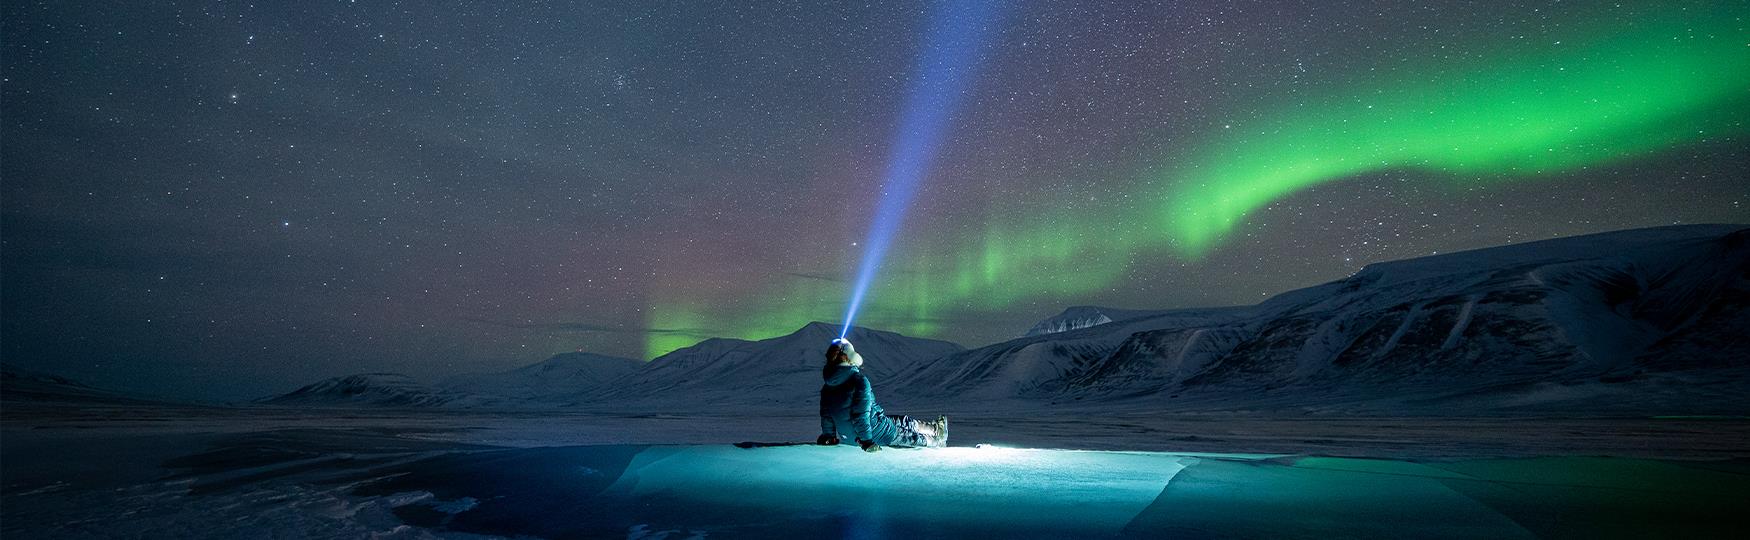 A person sitting on an ice formation with a headlamp on their head while looking up at a clear starry sky with northern lights in the background